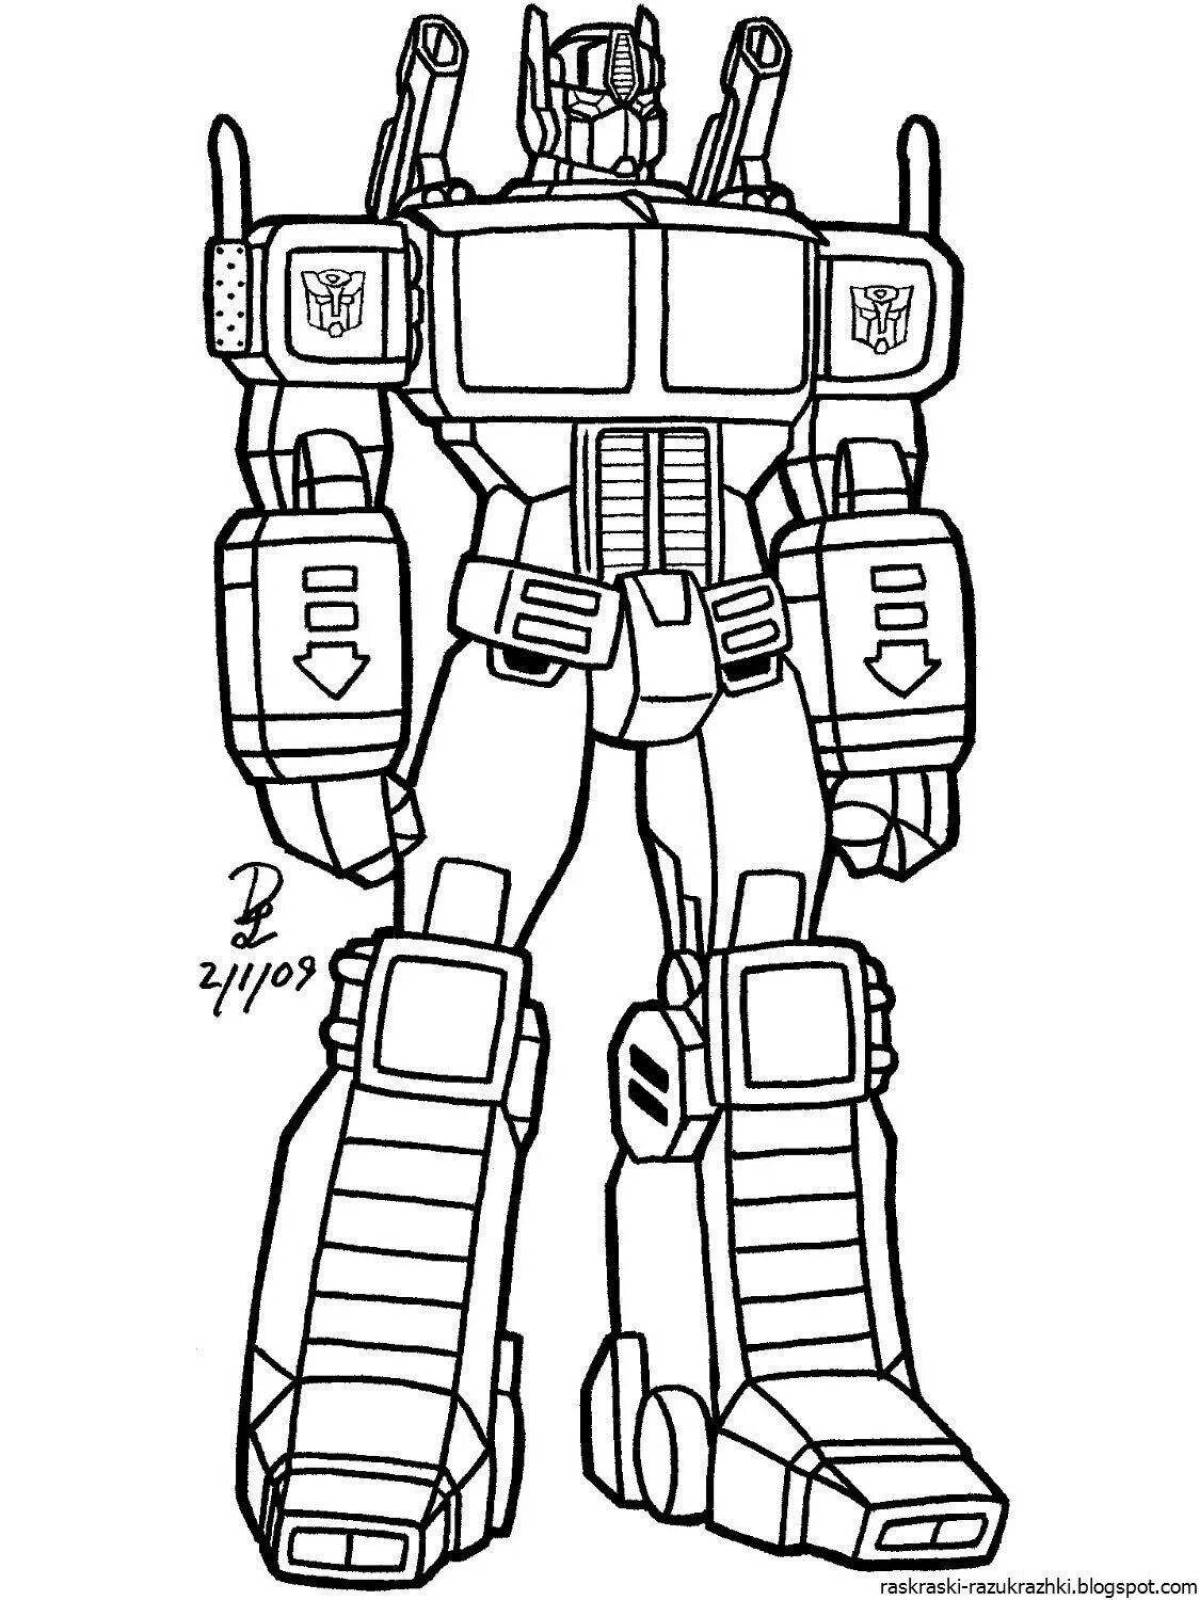 Adorable Transforming Robot Coloring Page for Boys